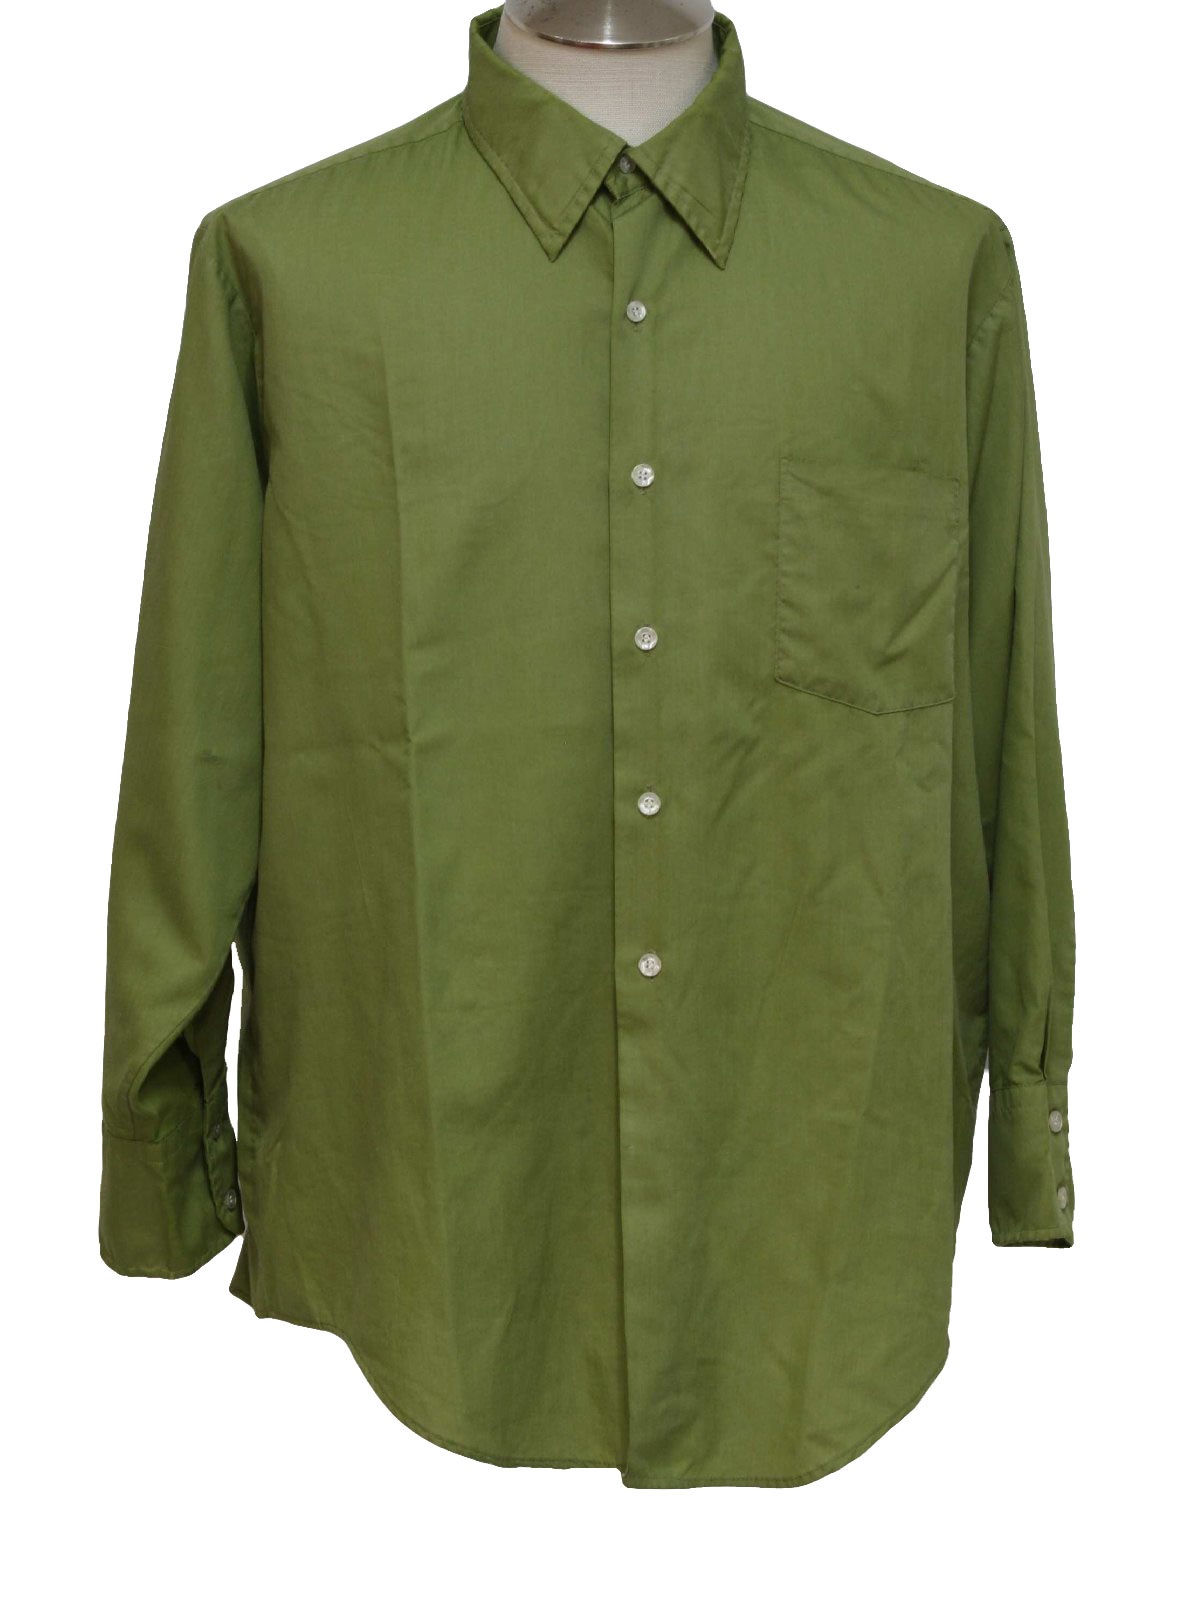 TownCraft 1970s Vintage Shirt: 70s -TownCraft- Mens avocado green ...